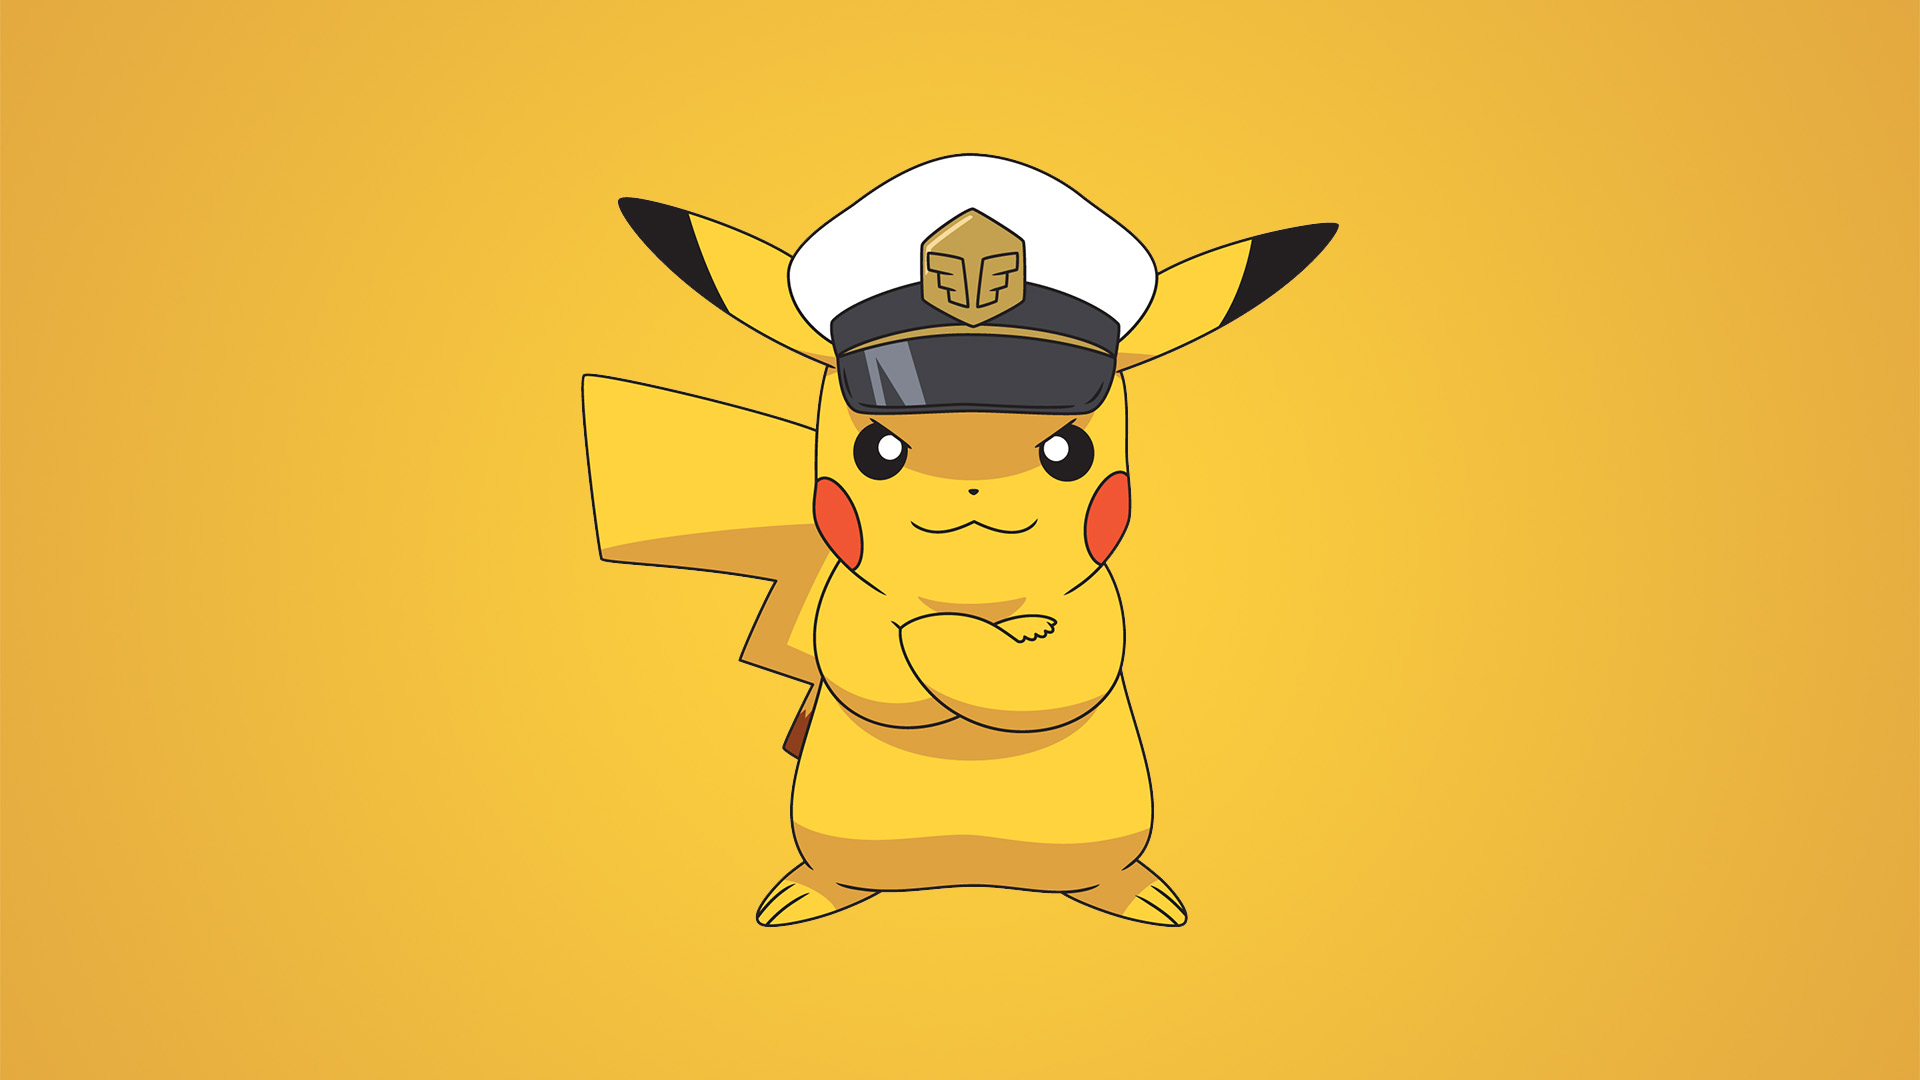 An illustration of new Pokémon animated series Captain Pikachu, a Pikachu who stands with arms folded and wearing a military captain hat.